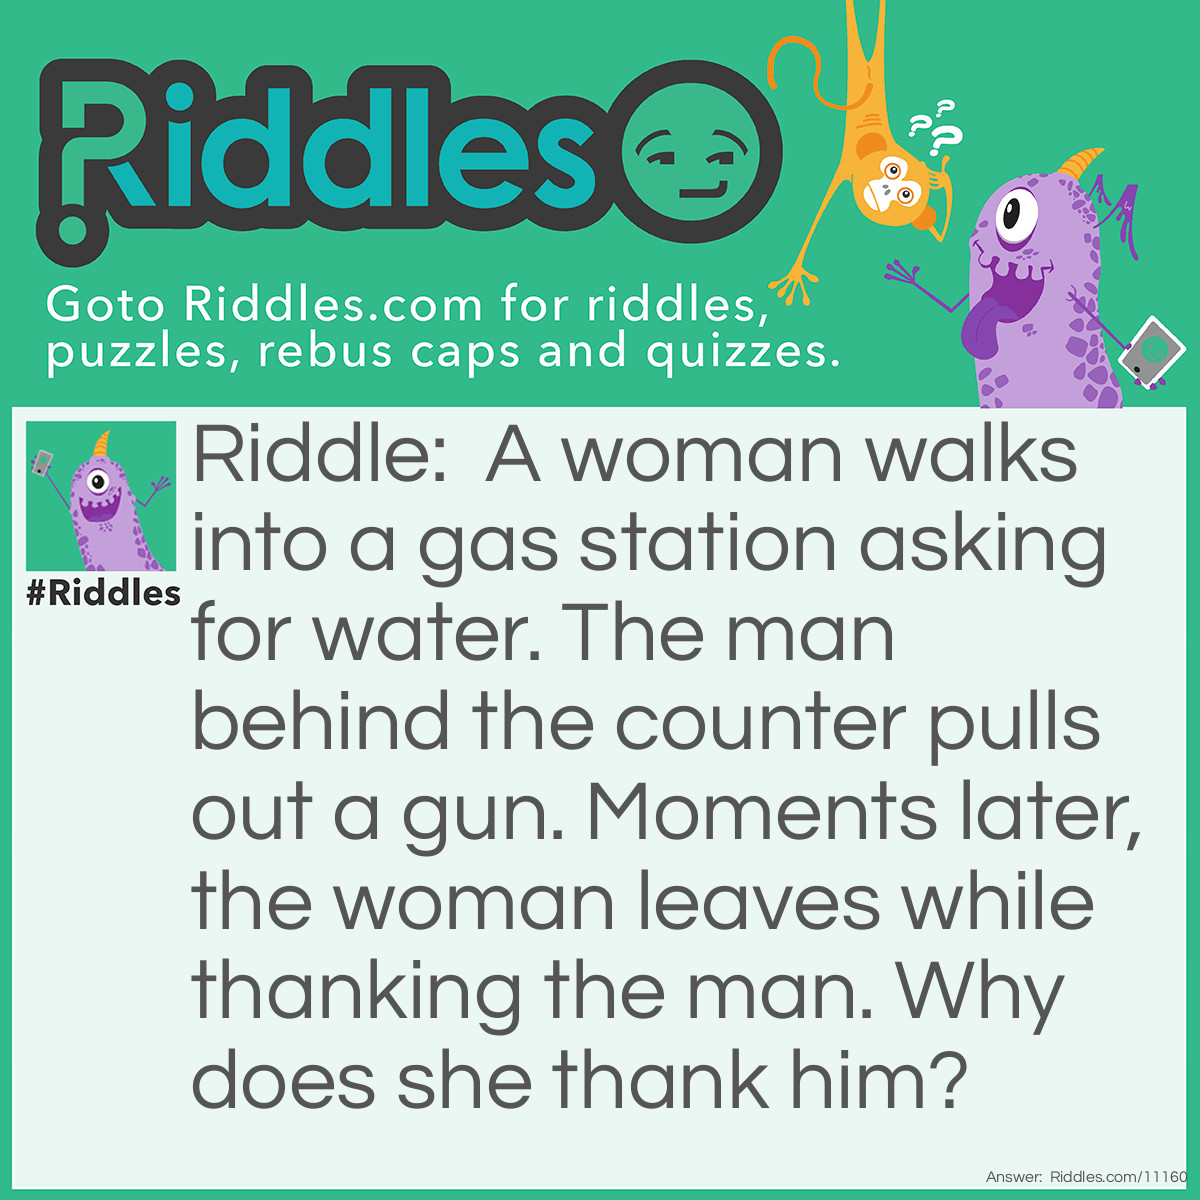 Riddle: A woman walks into a gas station asking for water. The man behind the counter pulls out a gun. Moments later, the woman leaves while thanking the man. Why does she thank him? Answer: The woman asked for water because she had hiccups. The man pulled out the gun to scare her, causing the hiccups to go away.